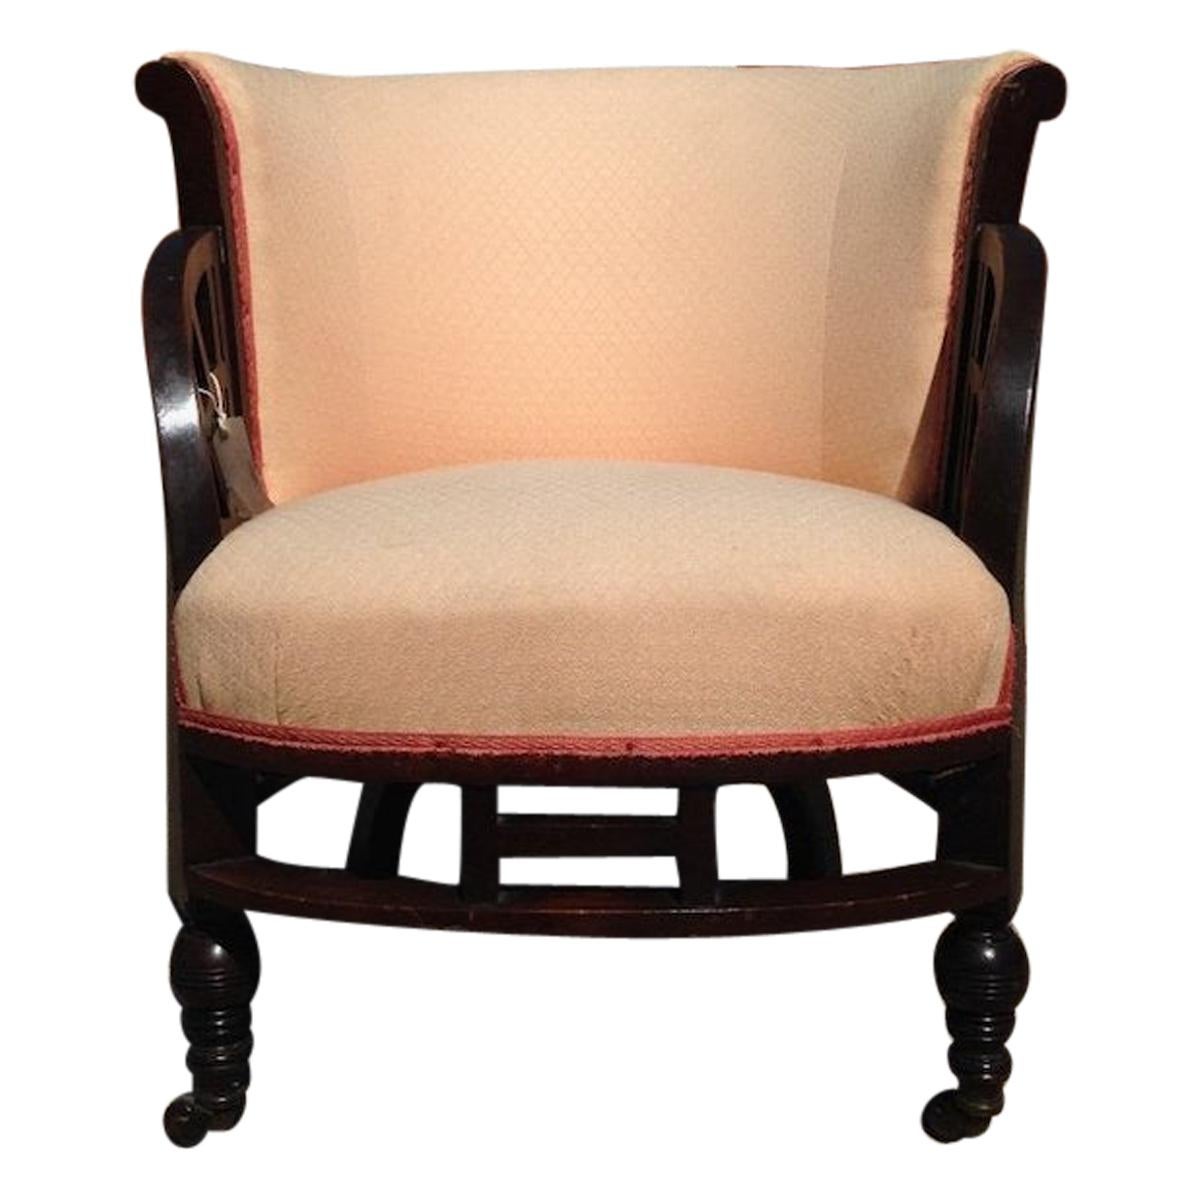 E W Godwin, Attributed, an Anglo-Japanese Circular Armchair with Fan Shaped Arms